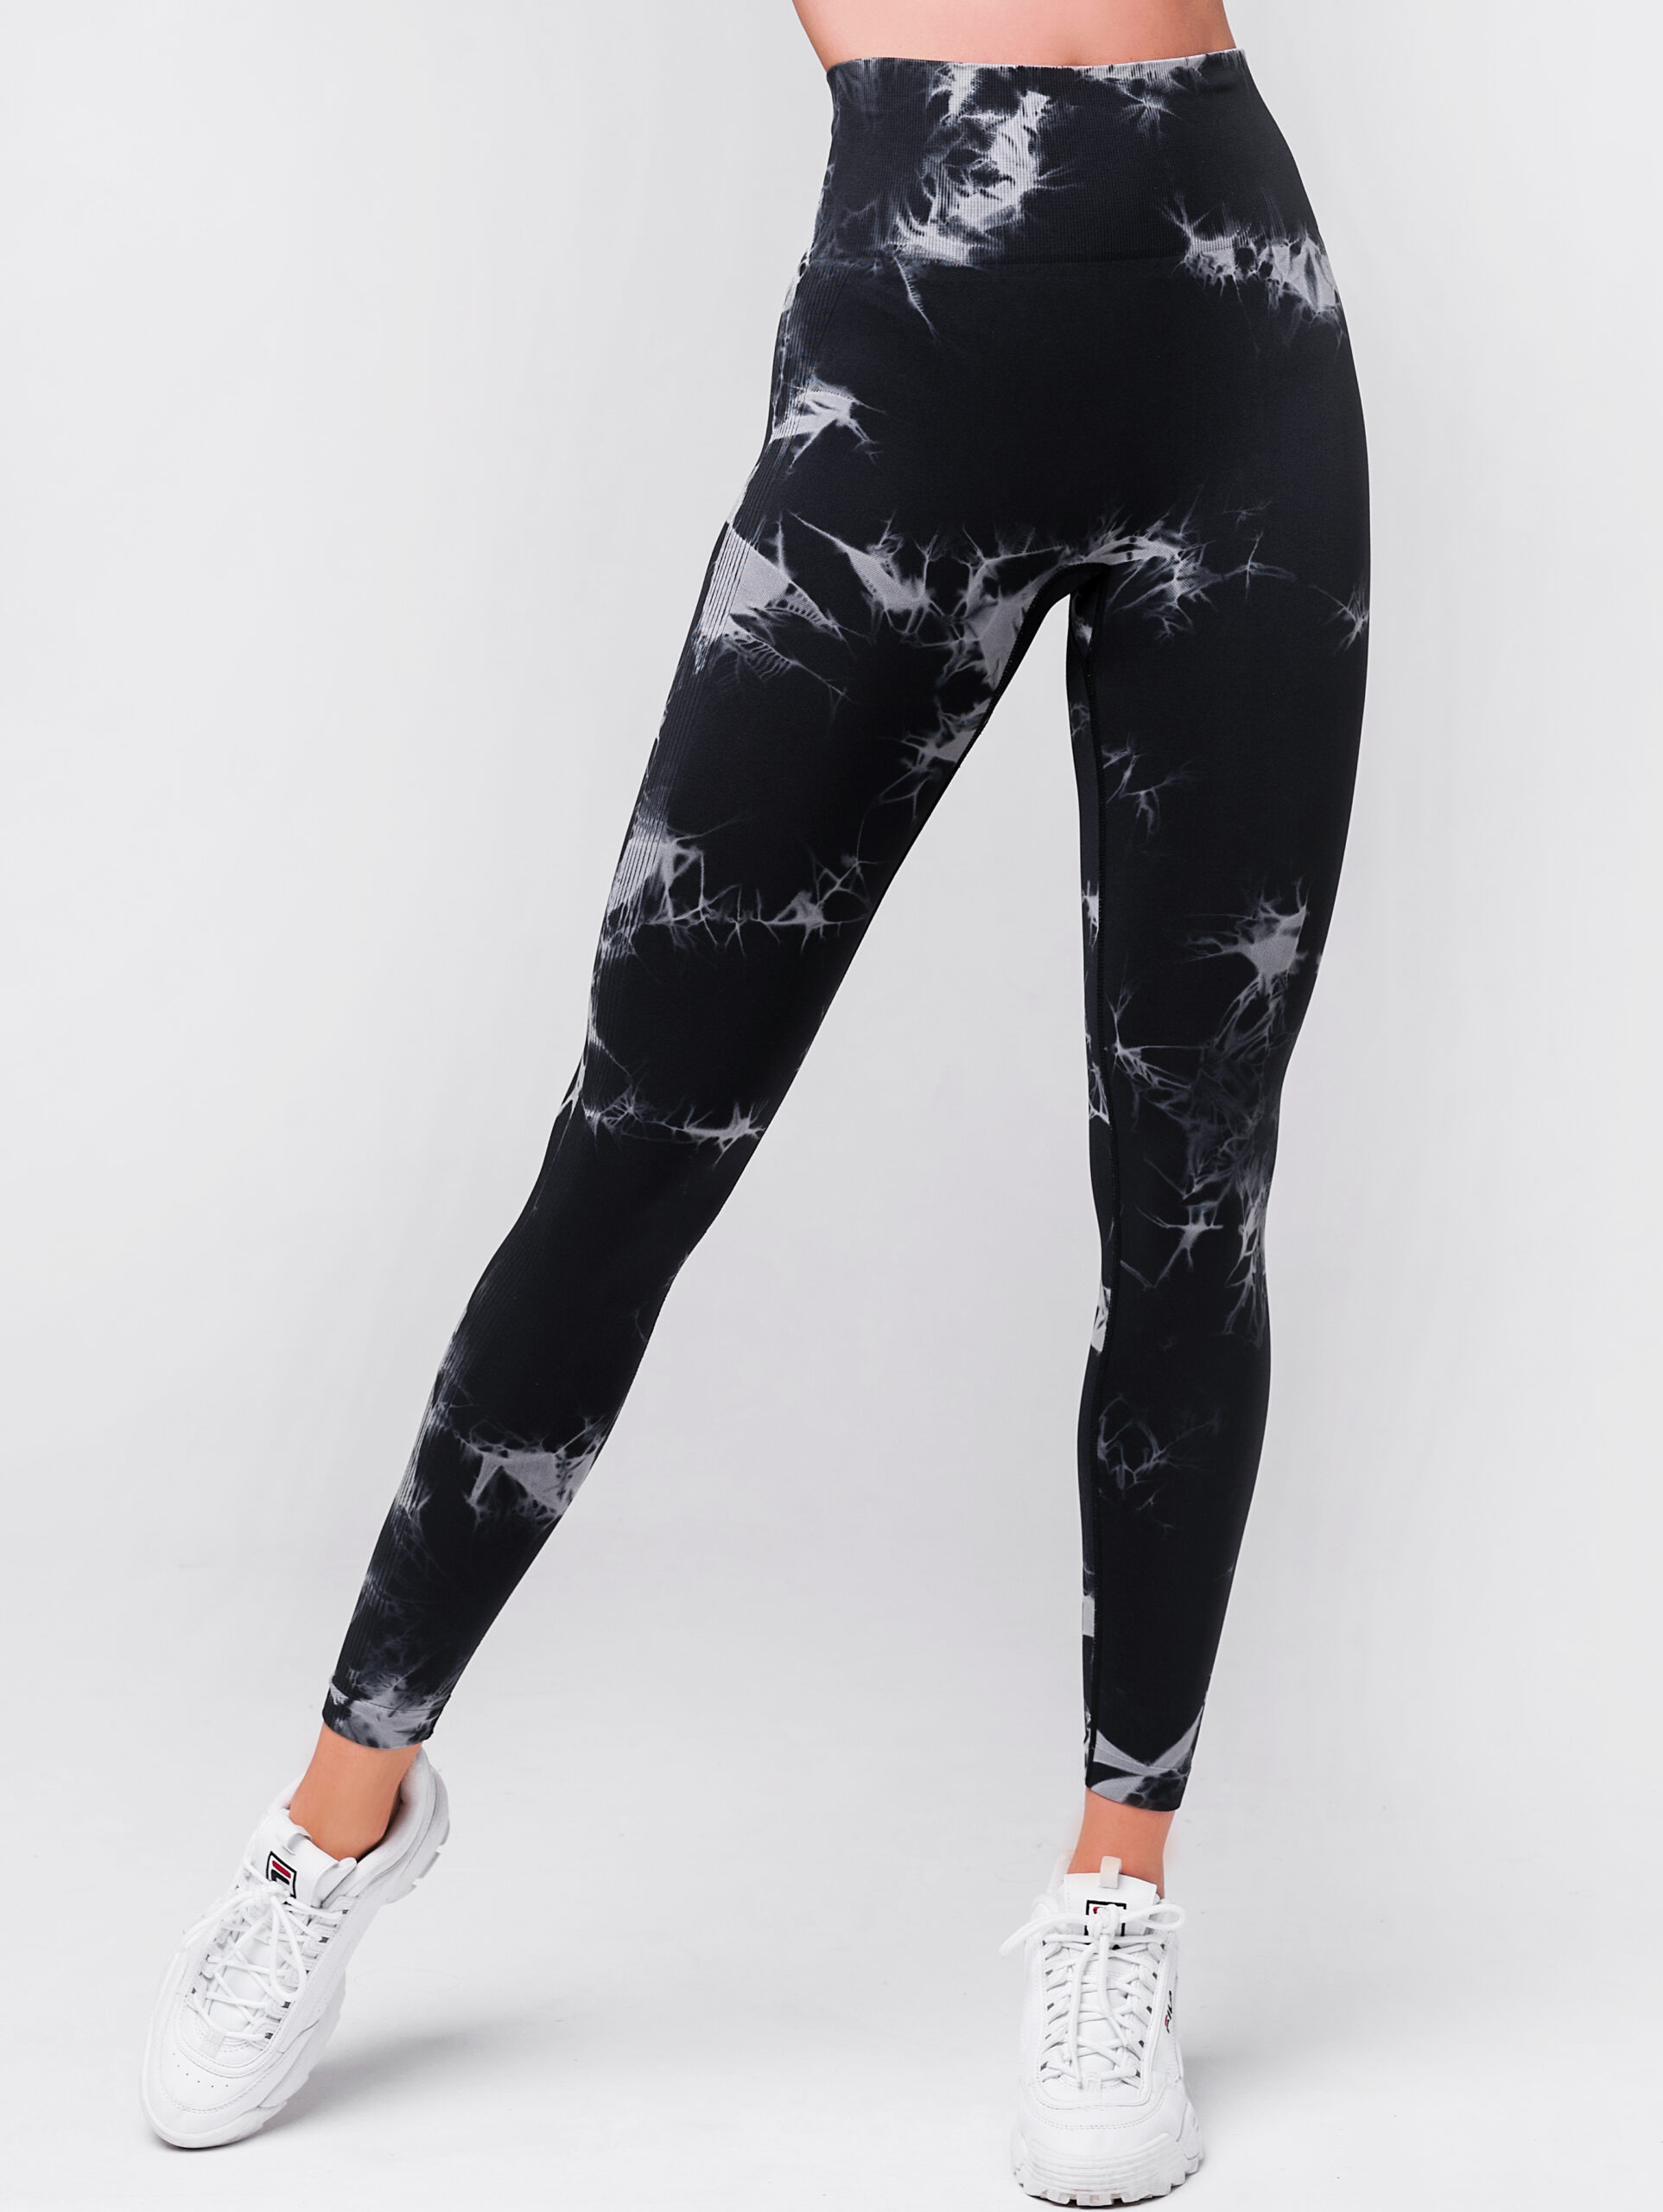 Fitness leggings in graphite and black color